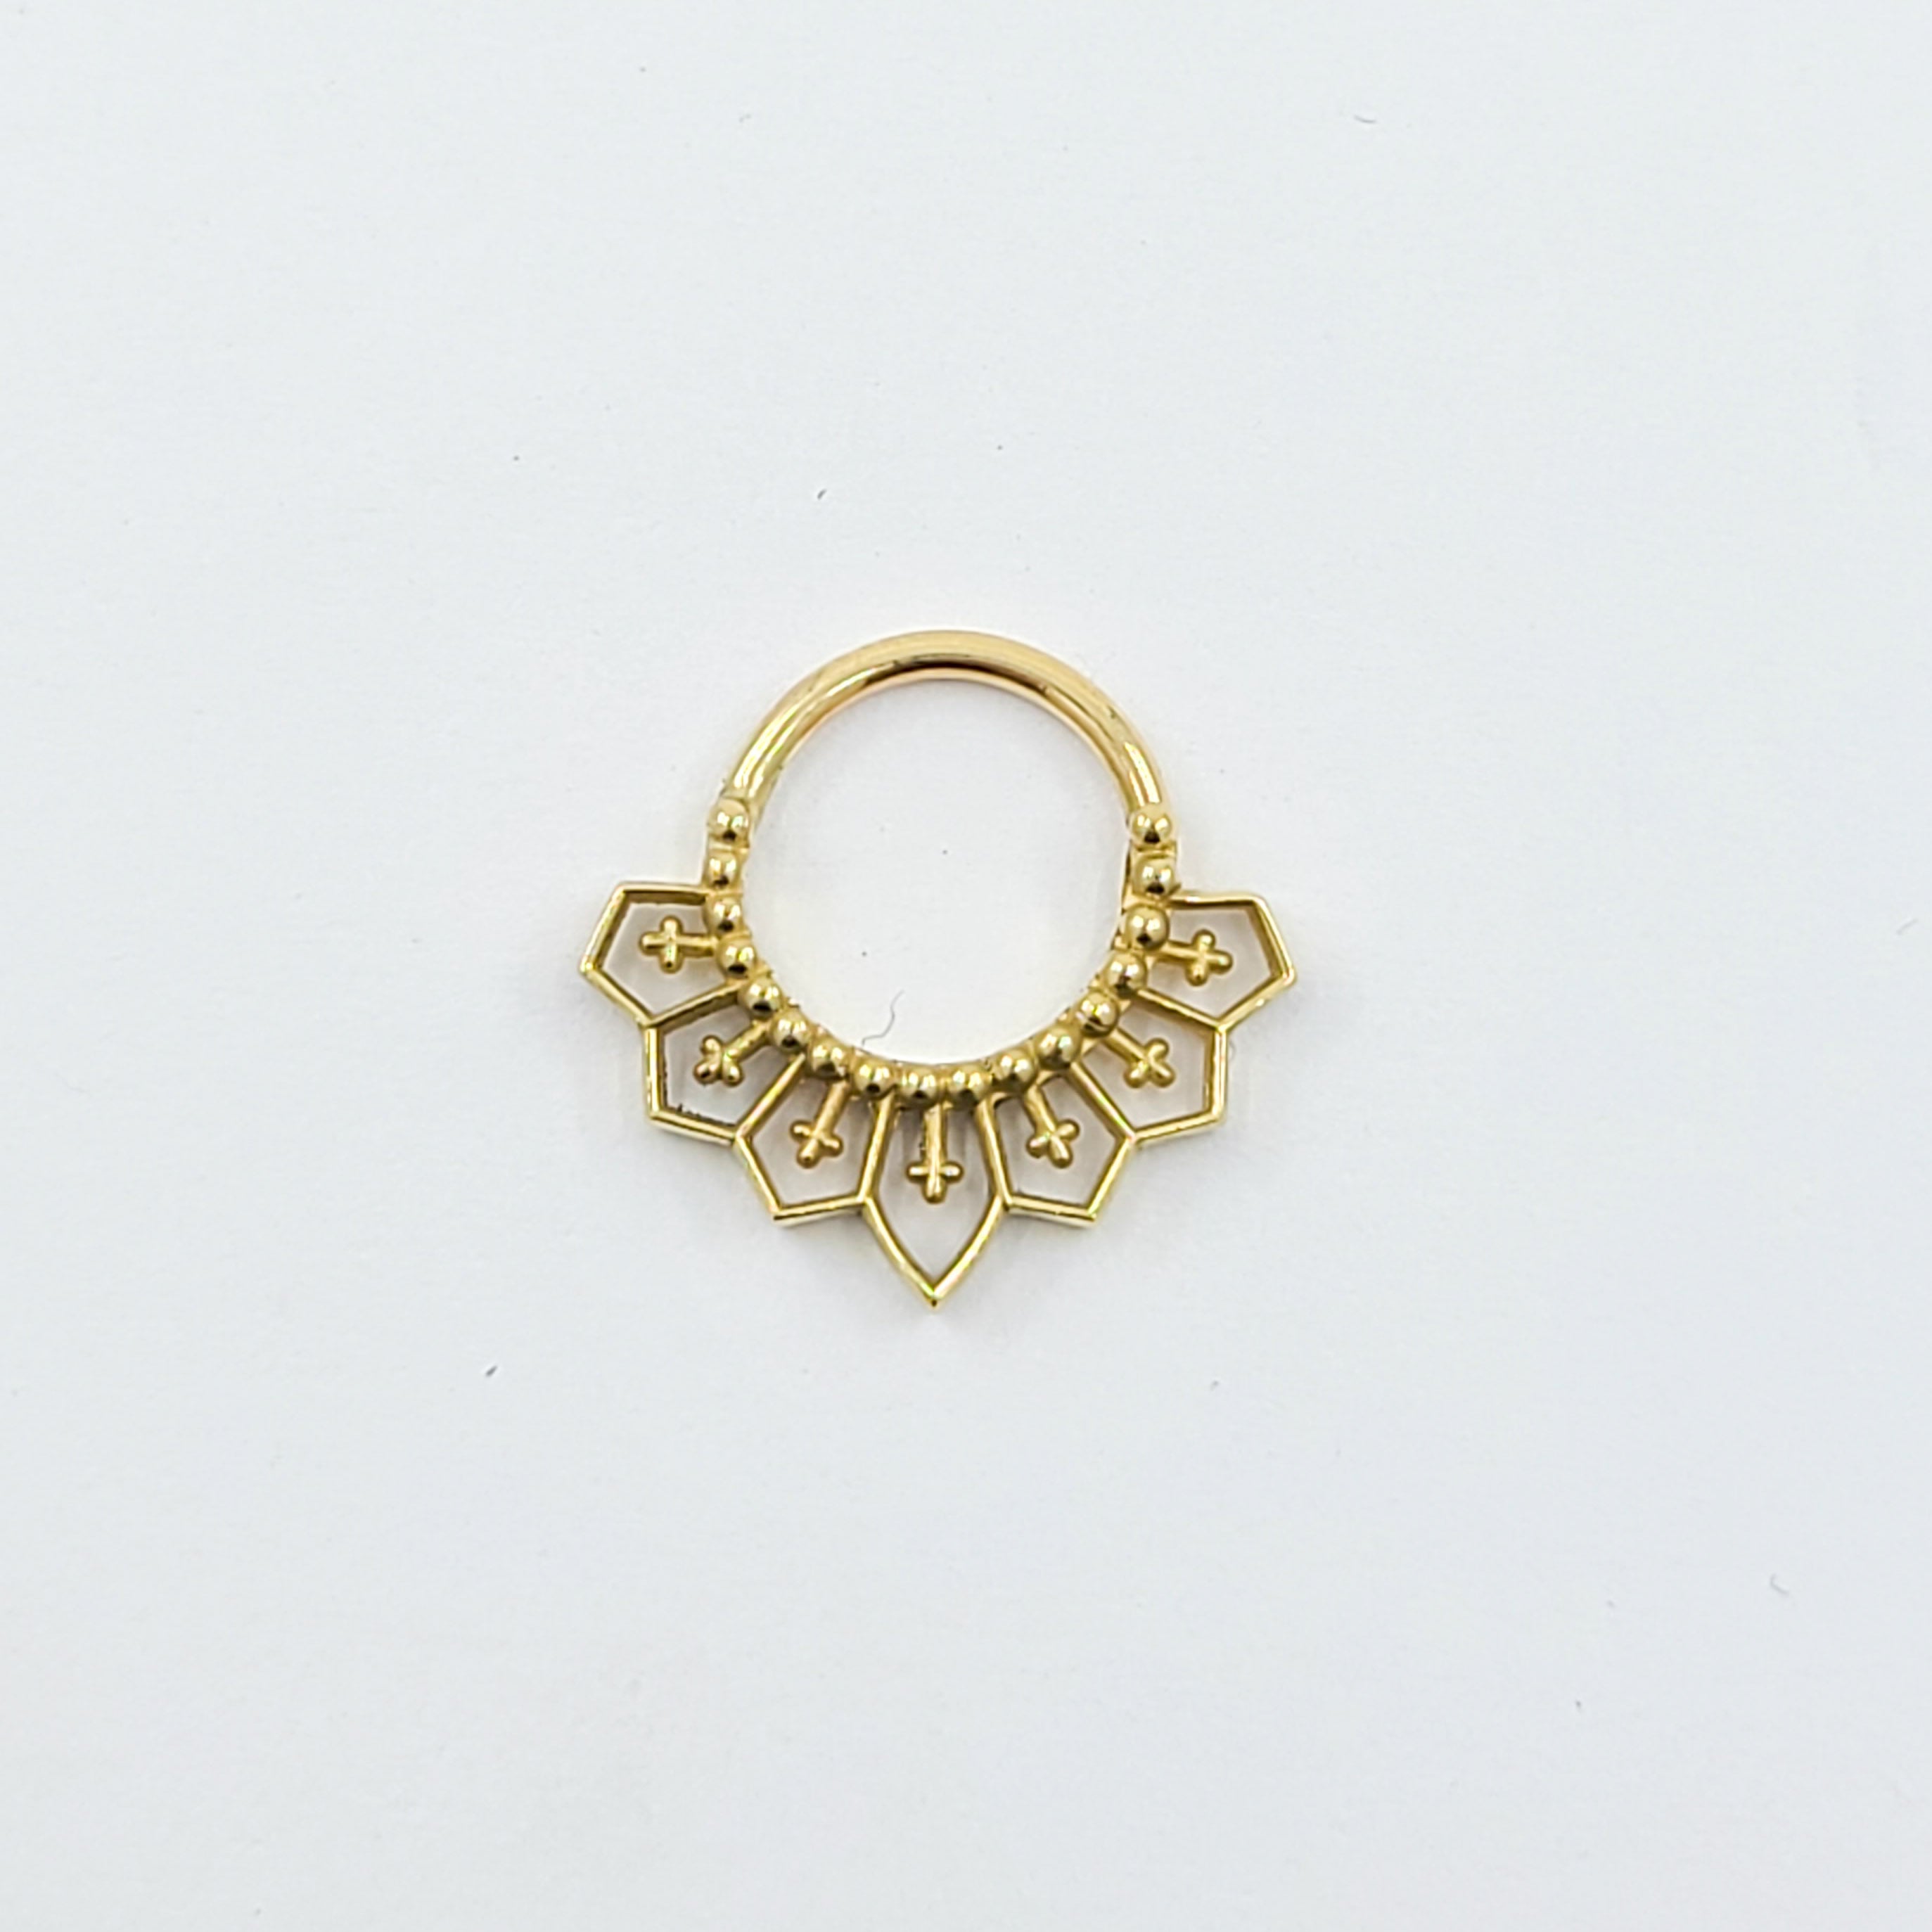 10K - 14K Solid Gold Gothic Lace Septum, Inverted Cross Nose Ring